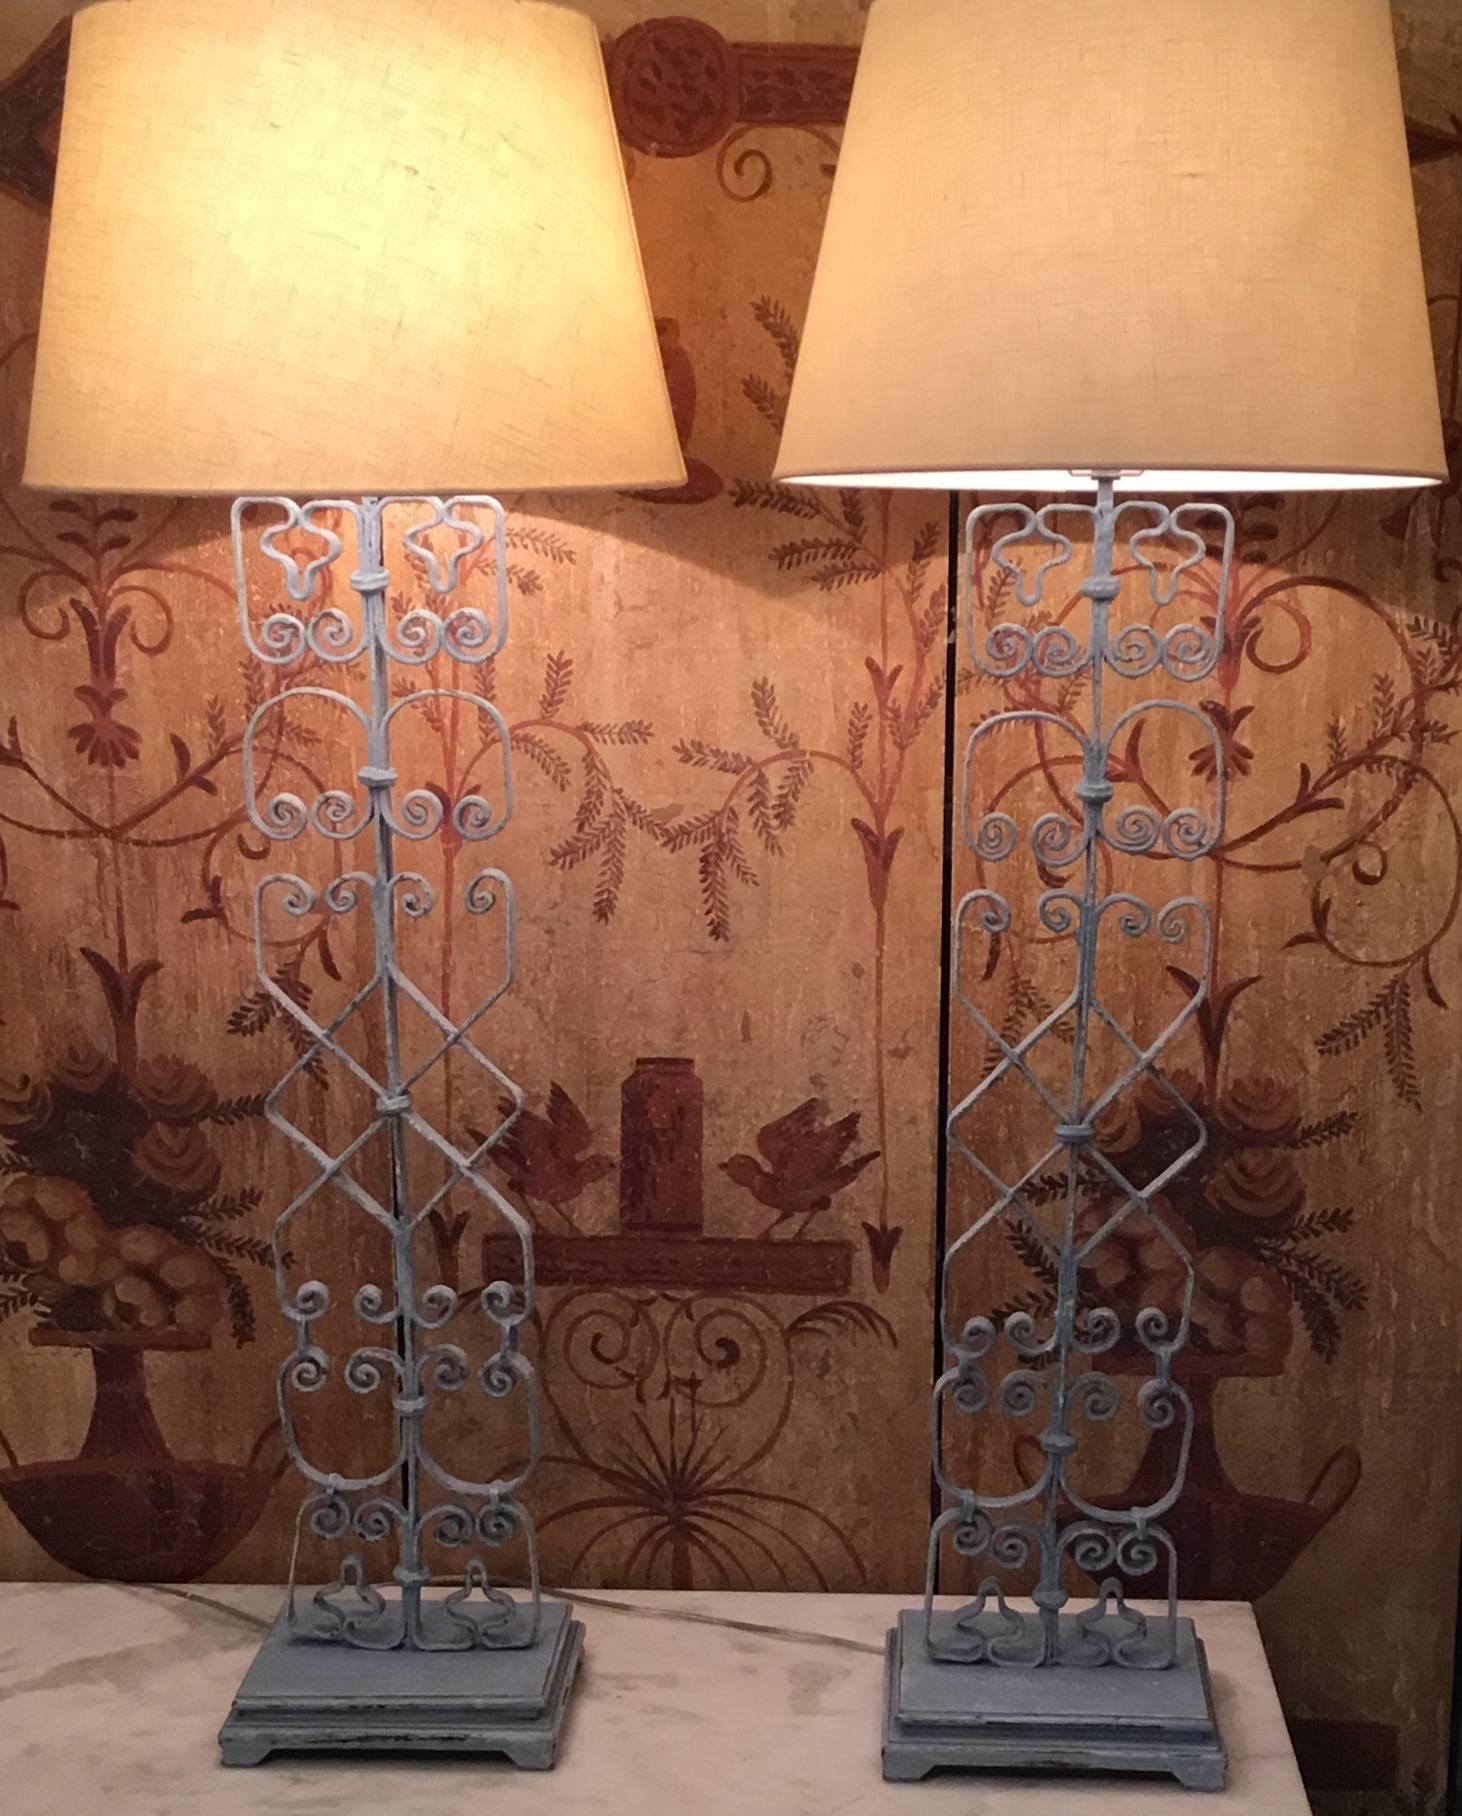 Pair of architectural table lamps made of antique hand-forged iron professionally mounted on a decorative wood made, newly electrified and ready to use.
Total height is without the shades 36